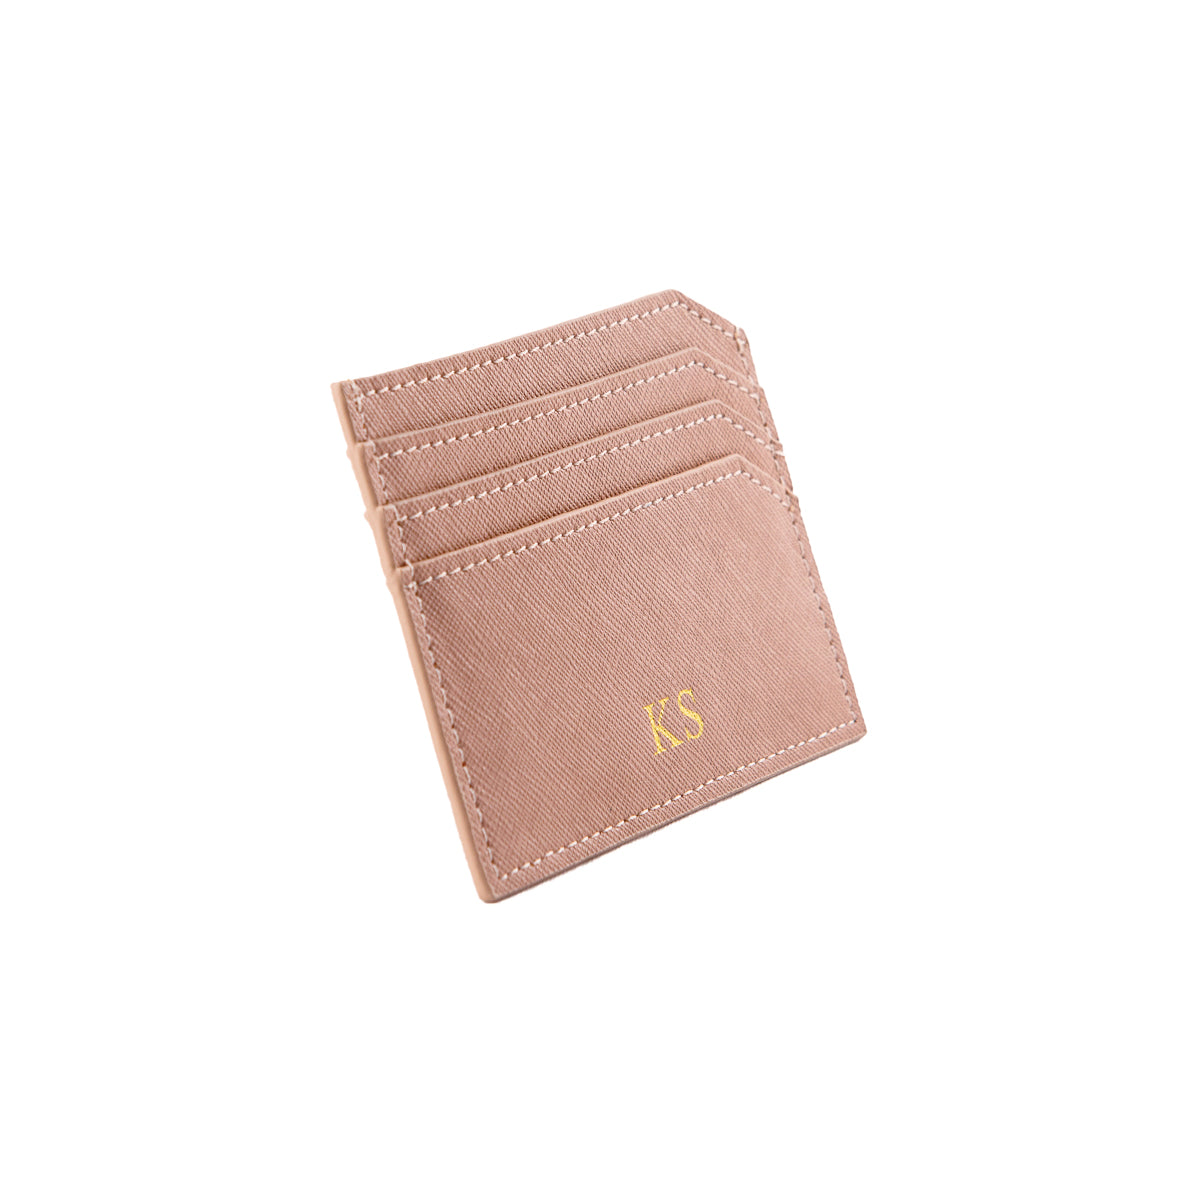 Personalised Nude Saffiano Leather Cardholder